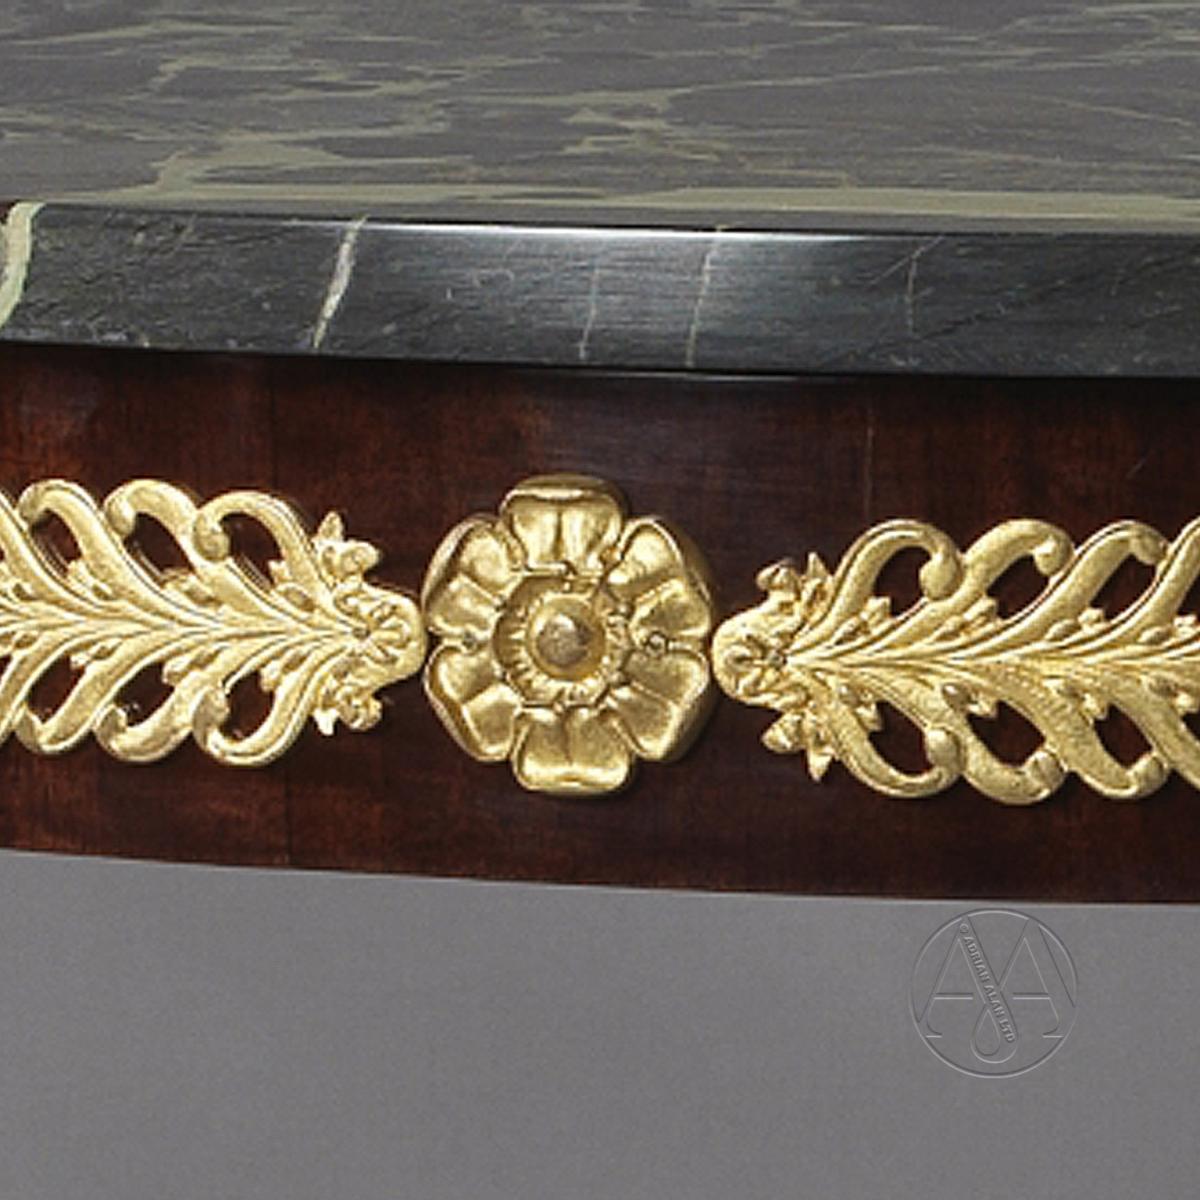 A detail of Fine Empire Style Gilt-Bronze and Mahogany Gueridon In The Manner of Jacob Desmalter